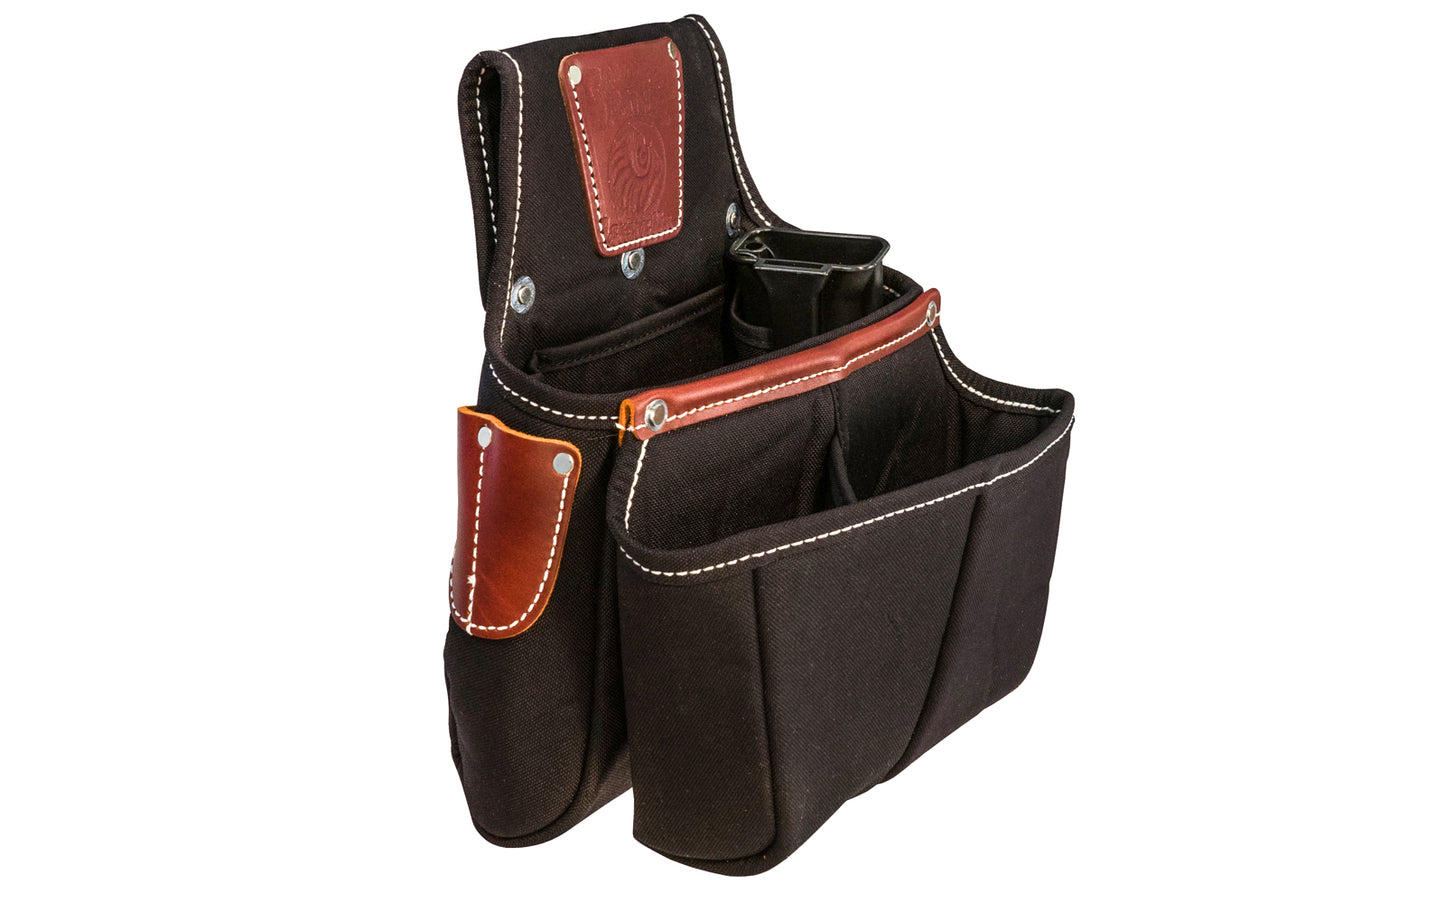 Occidental Leather "Oxy Finisher" Fastener Bag ~ Model 9520 - Fits a 3" work belt - These bags are ideal for trim, framing & finish work. Nylon main & outer bags. Holders include a speed square inside or out & features the 2-in-1 outer bag for maximum fastener capacity in a compact space. Nylon & genuine Leather